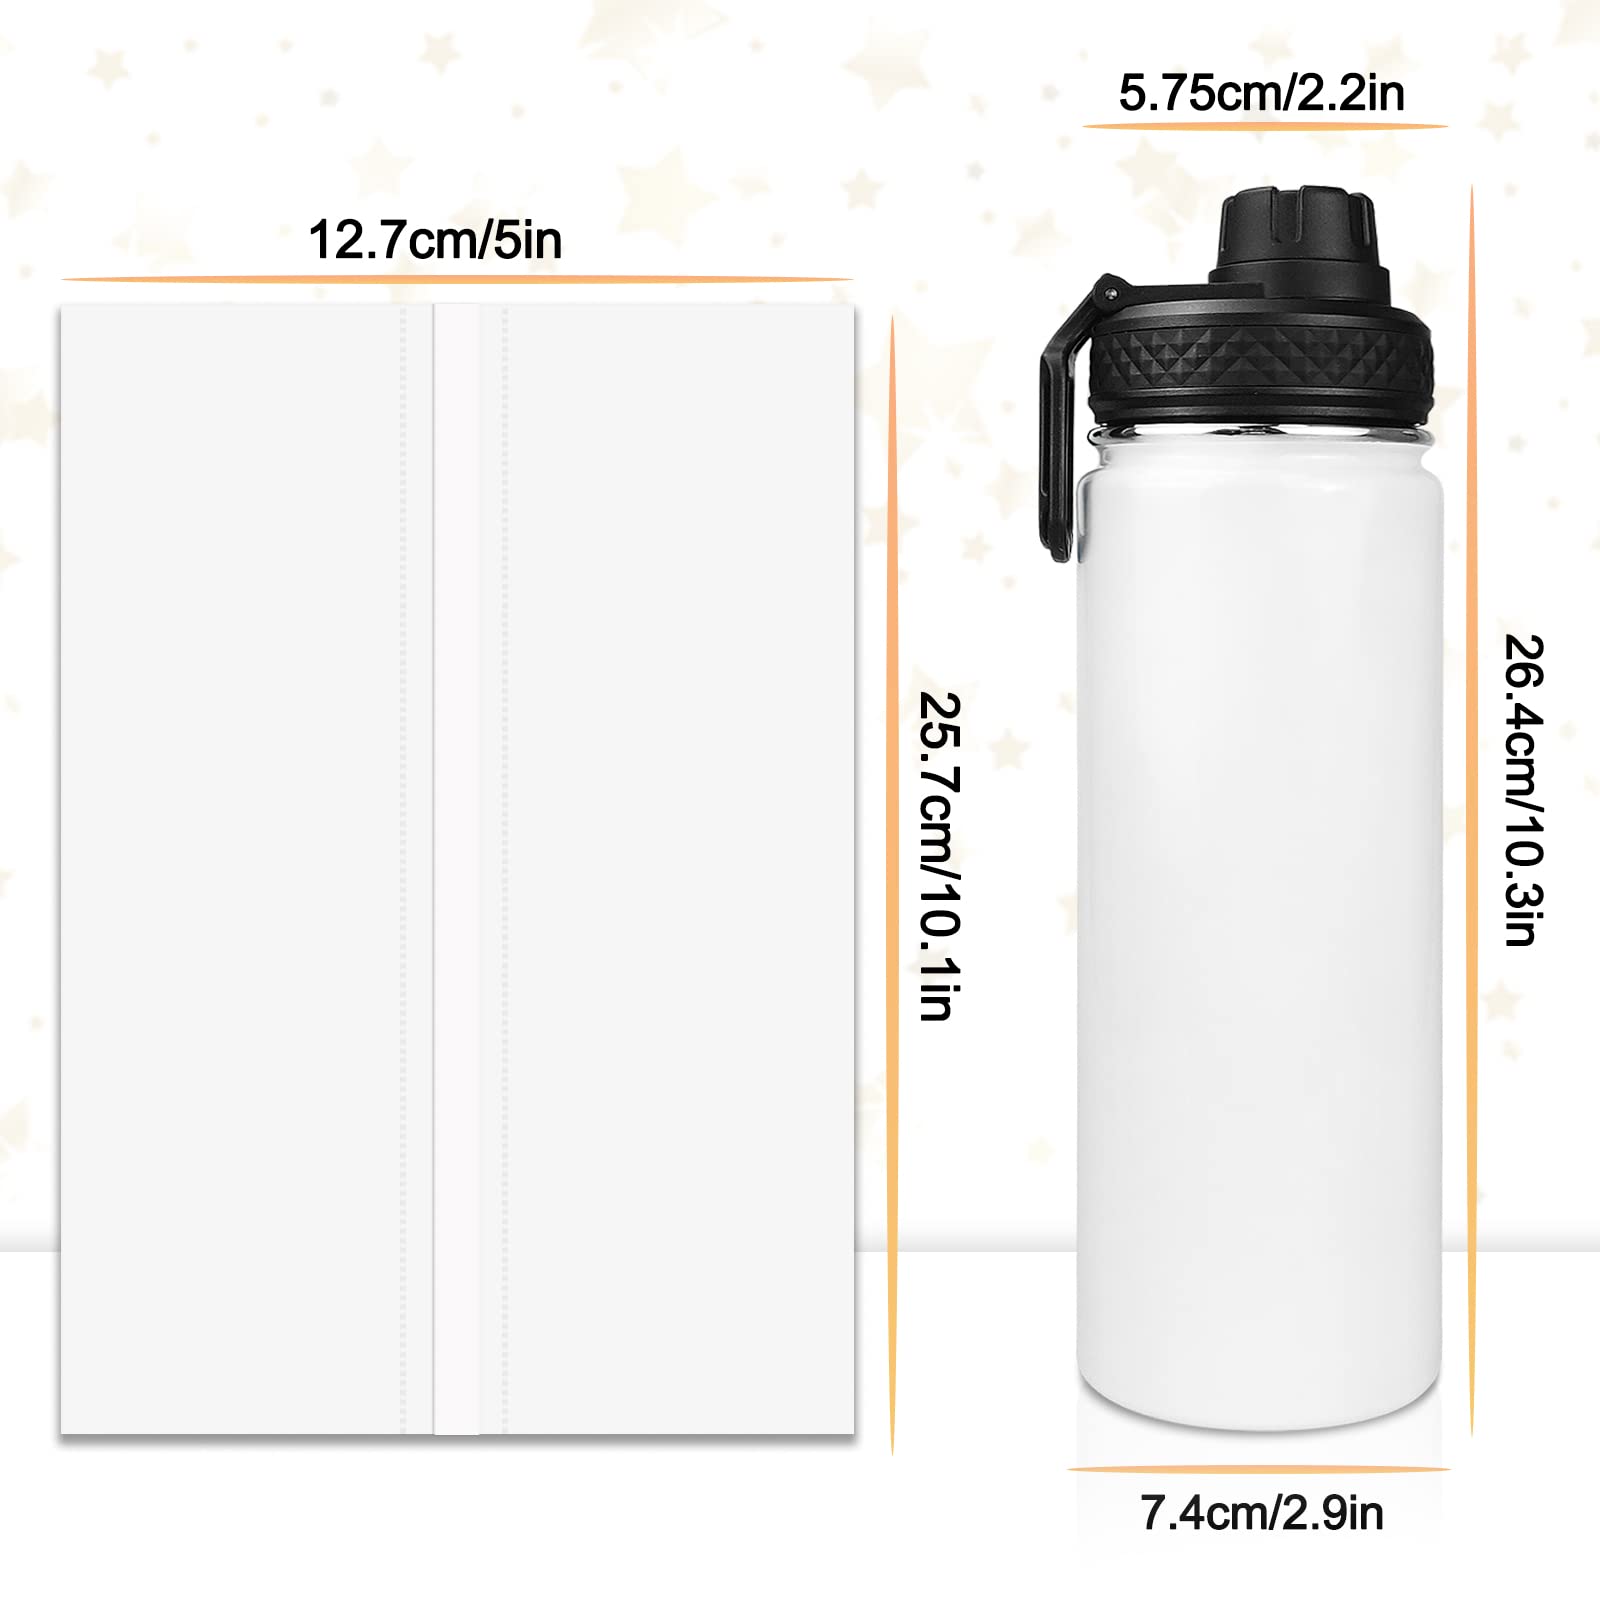 Amgkonp 22oz Sublimation Blanks Tumbler Sports Water Bottle Stainless Steel Vacuum Flask,Double Wall Insulated Thermos with Shrink Wrap Film,Sublimation Coating for Heat Press（8Pack）